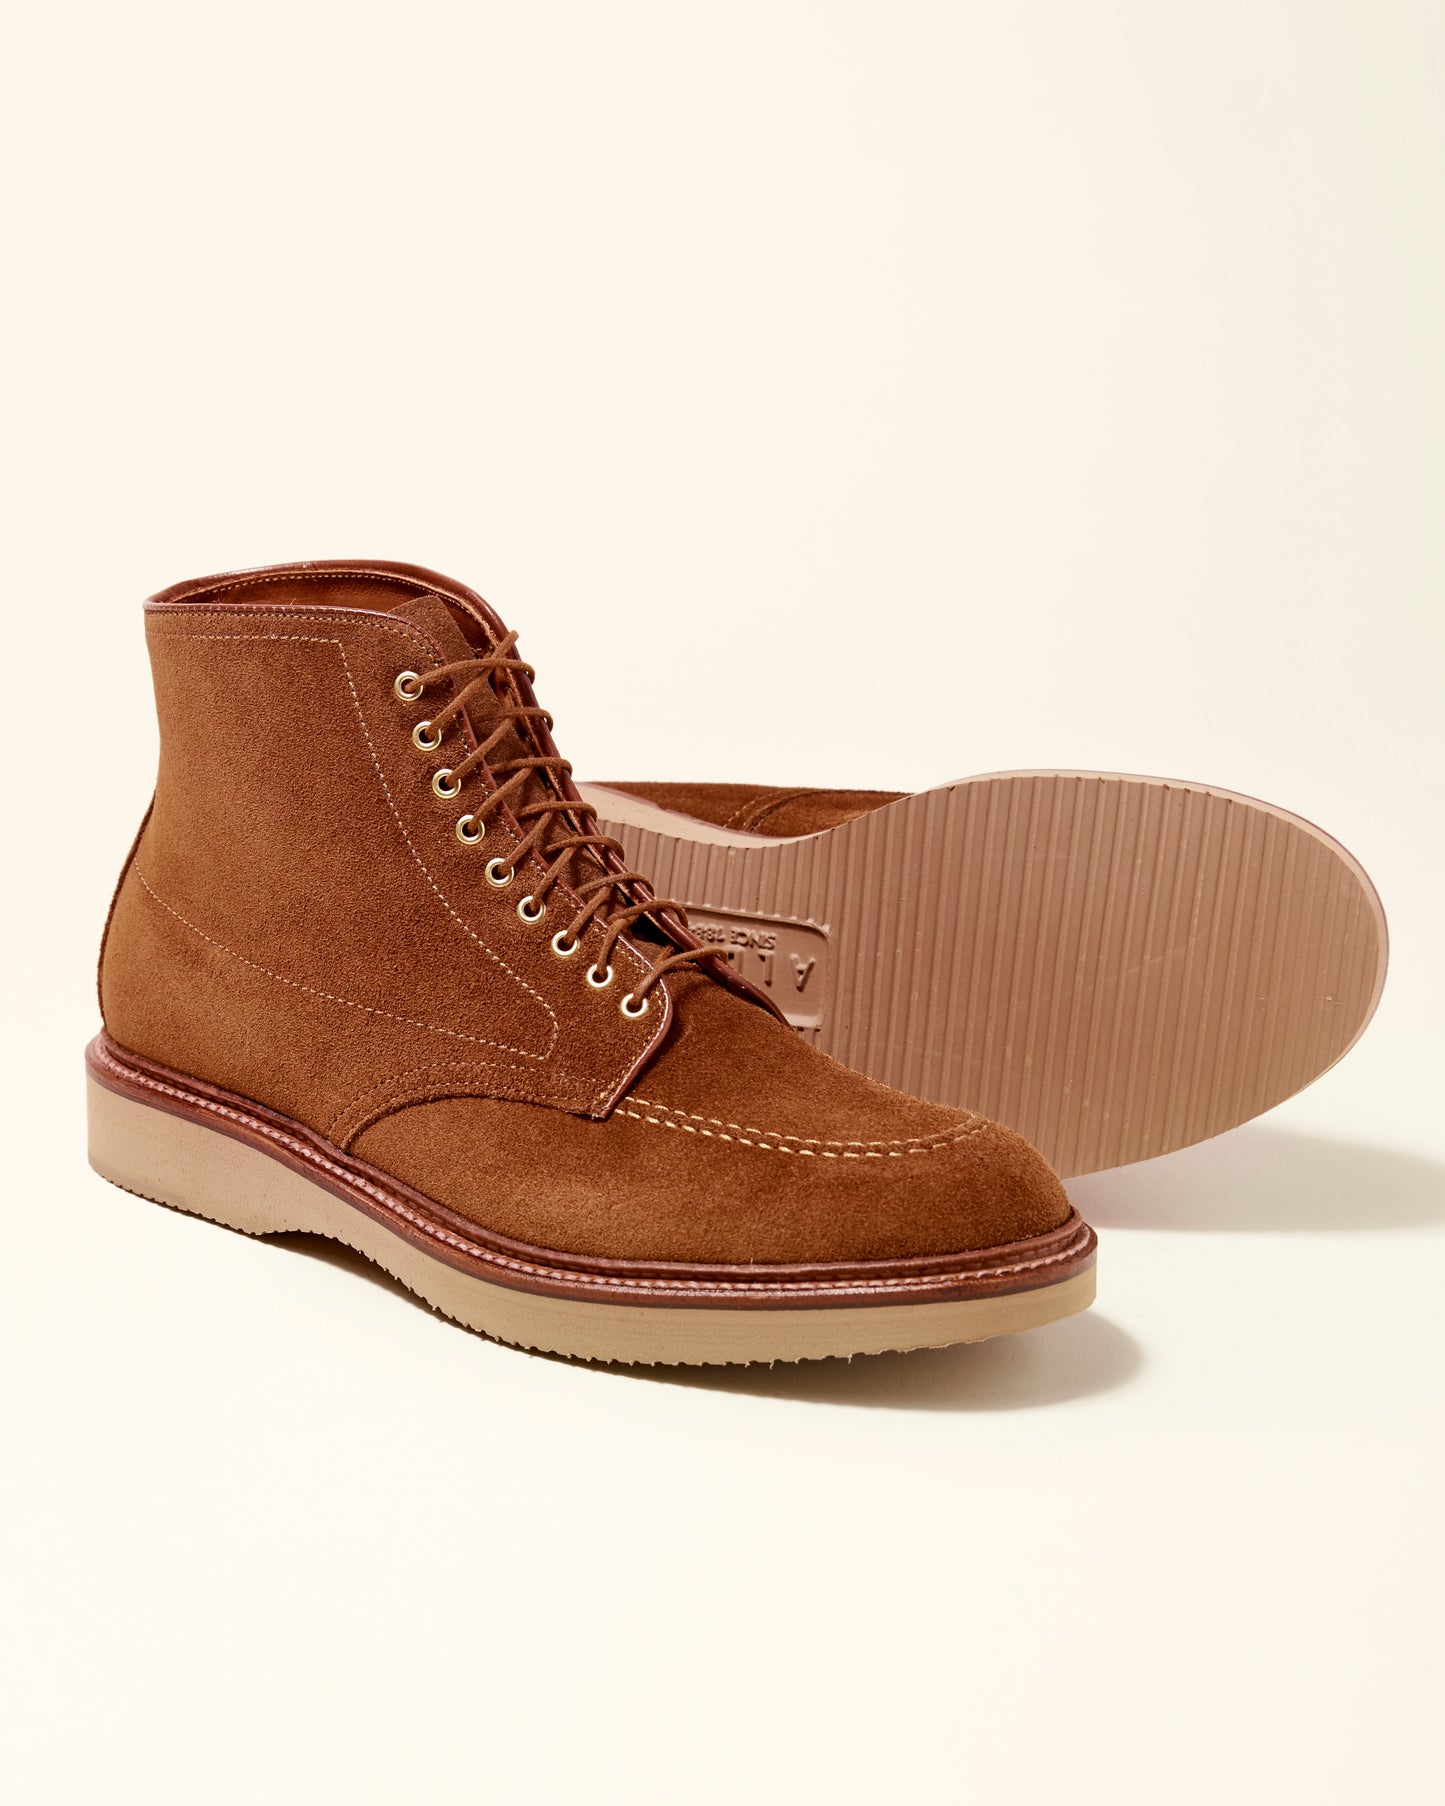 "Seattle Snuff" Indy Boot in Snuff Suede, Trubalance Last